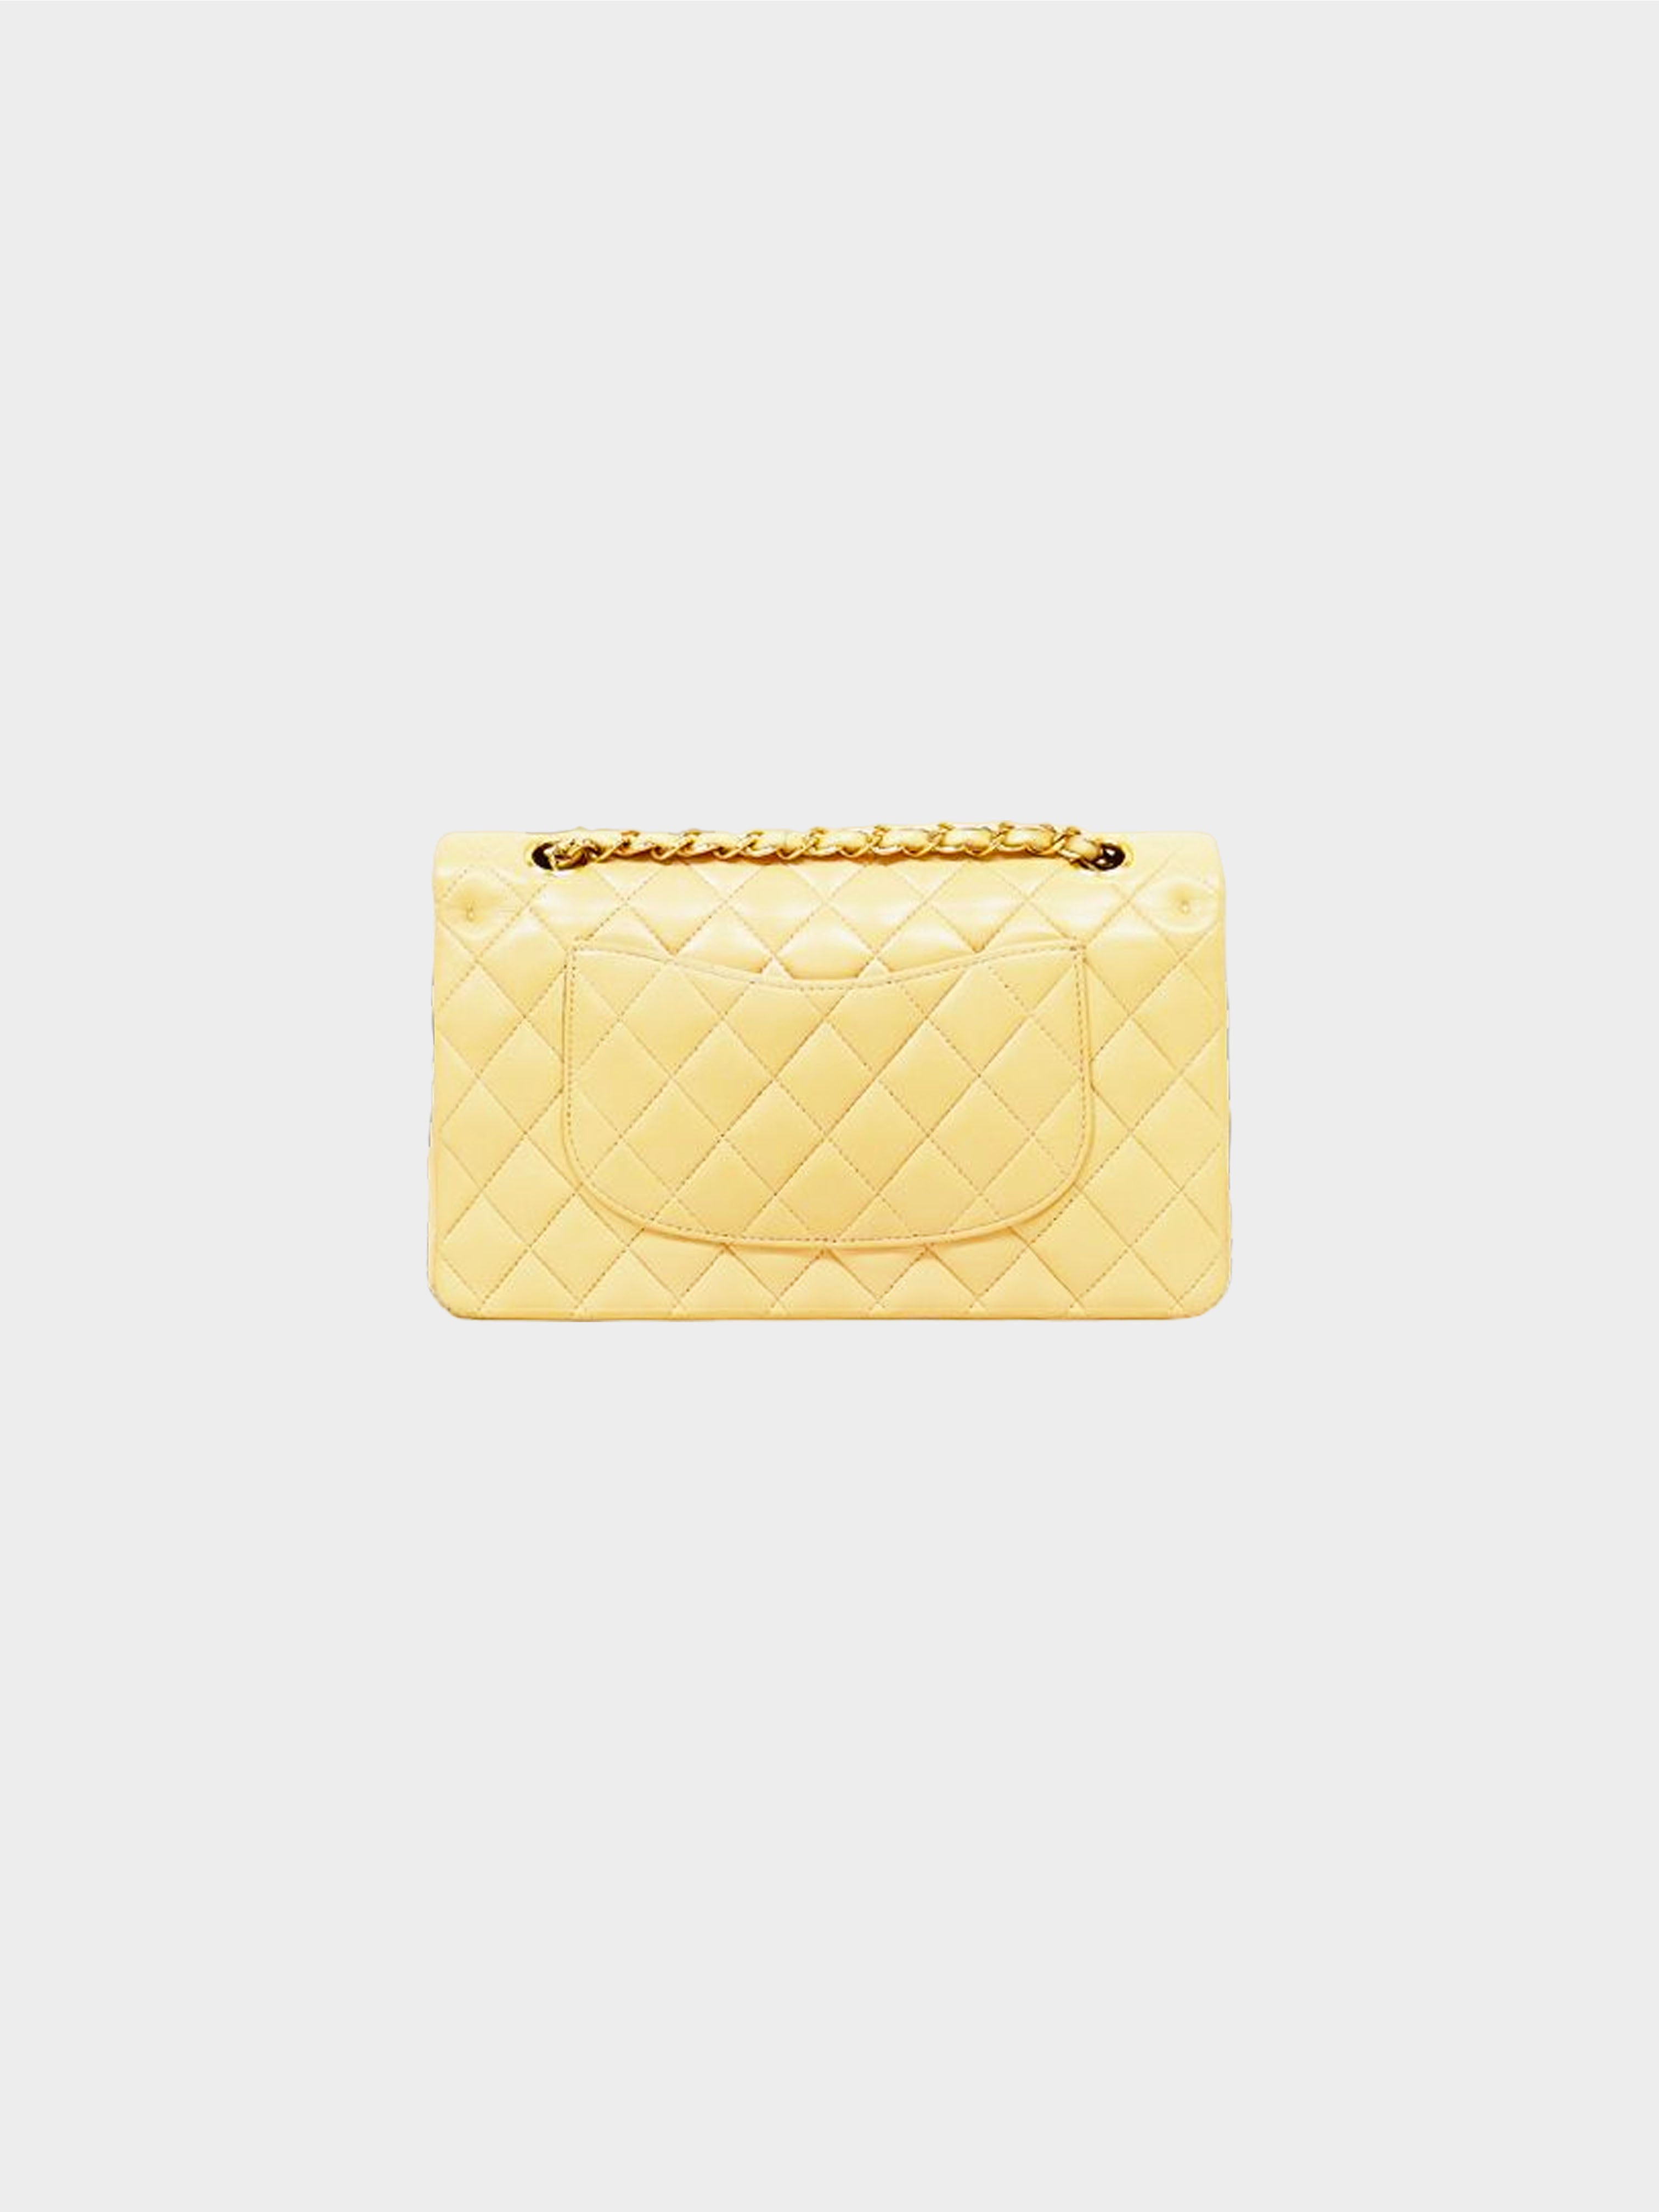 Chanel 2009 Beige Matelasse Quilted Flap Bag · INTO